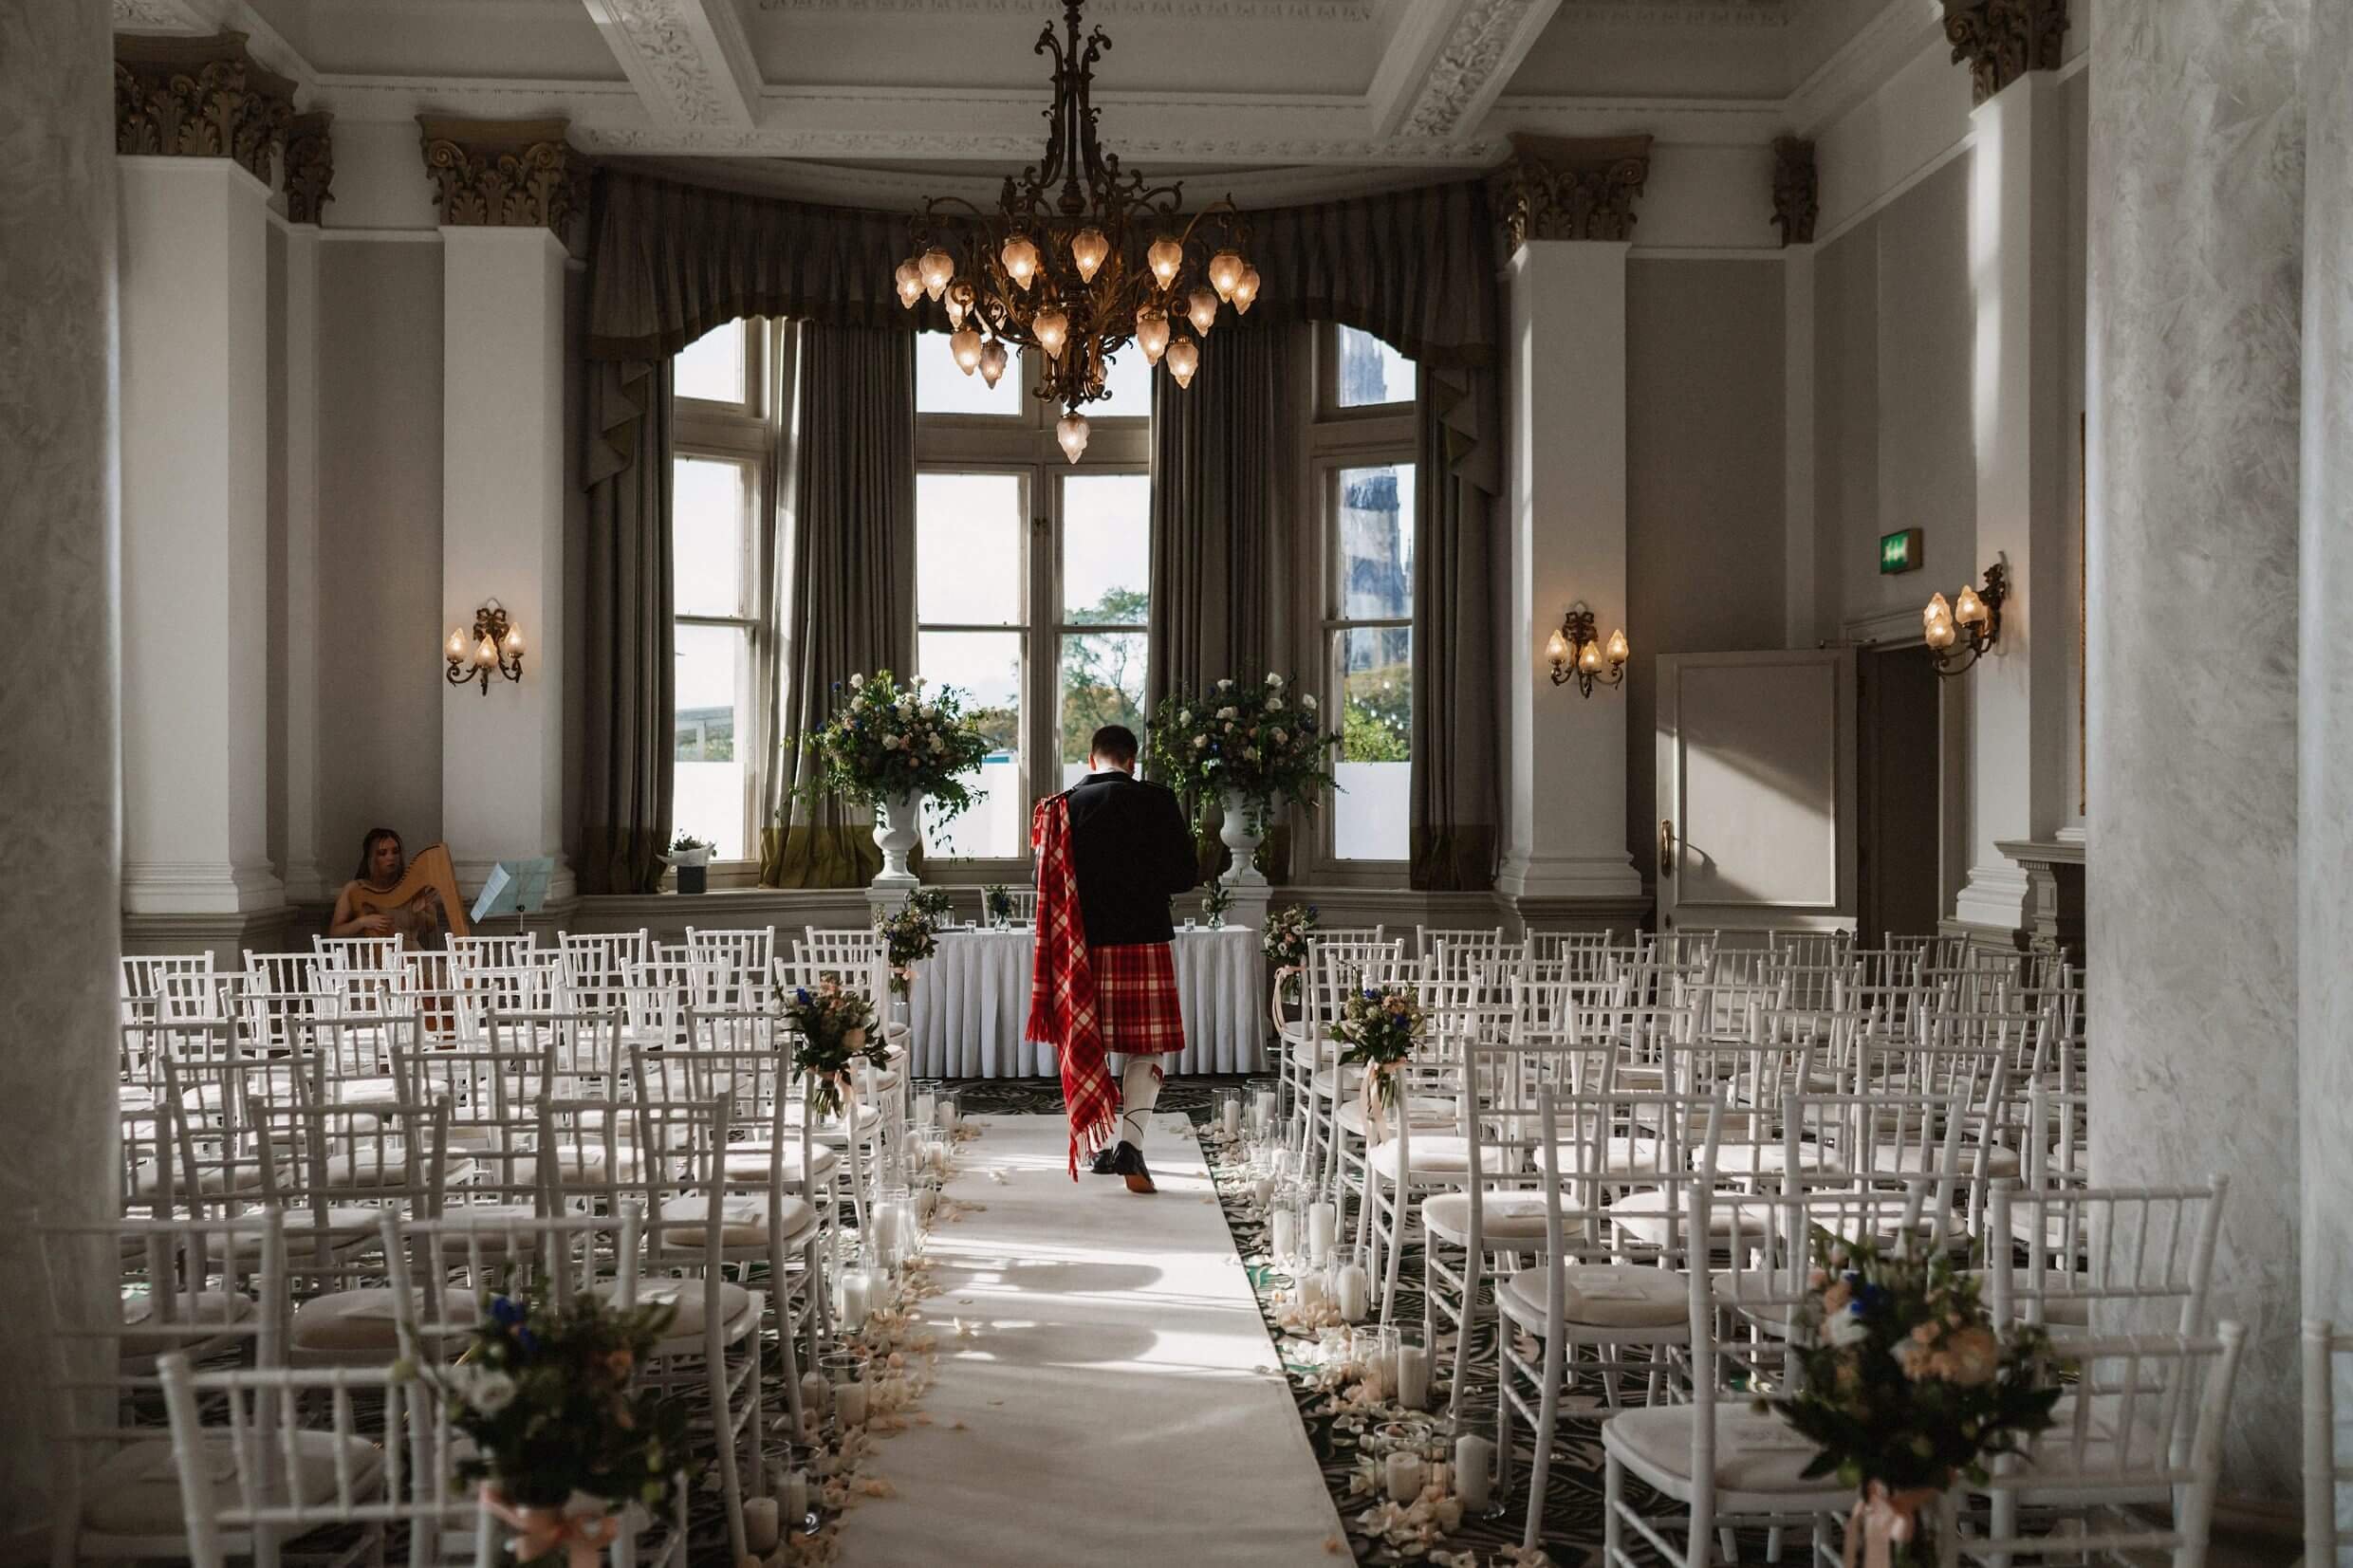 inside interior view of the balmoral hotel edinburgh wedding venue in scotland showing the groom standing at the top of the aisle in front of empty seating